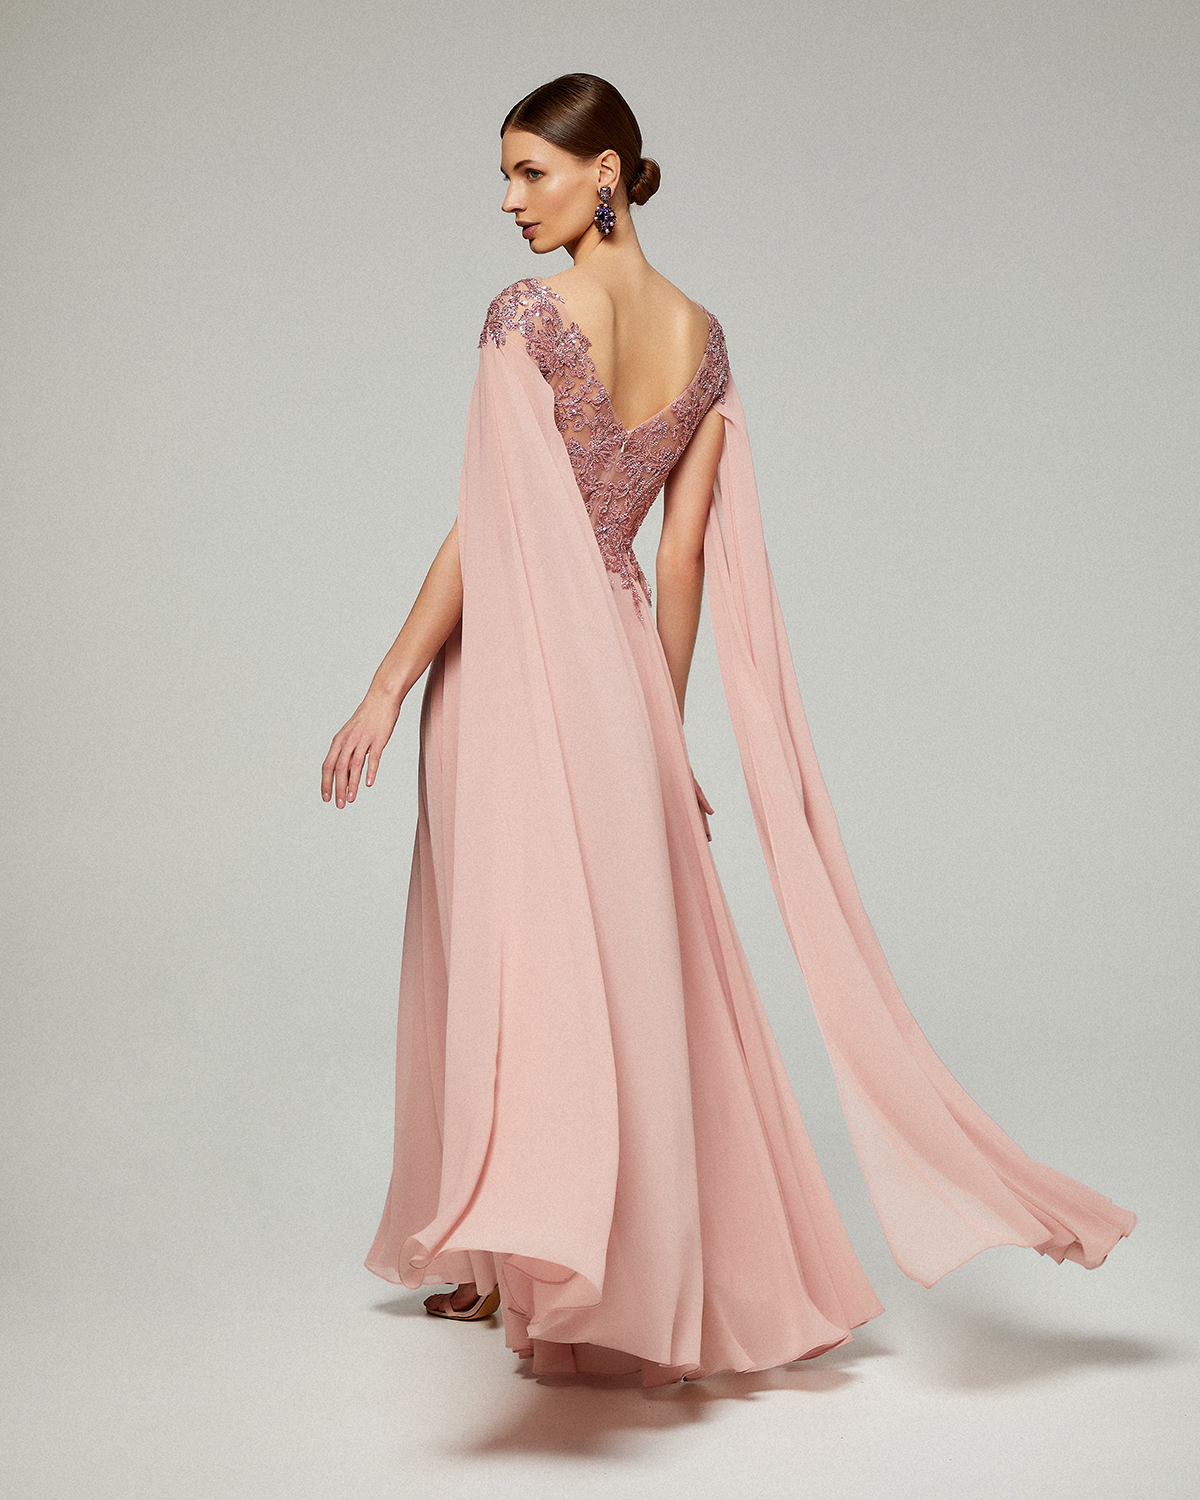 Classic Dresses / Long  chiffon dress with fully beaded lace top and long sleeves